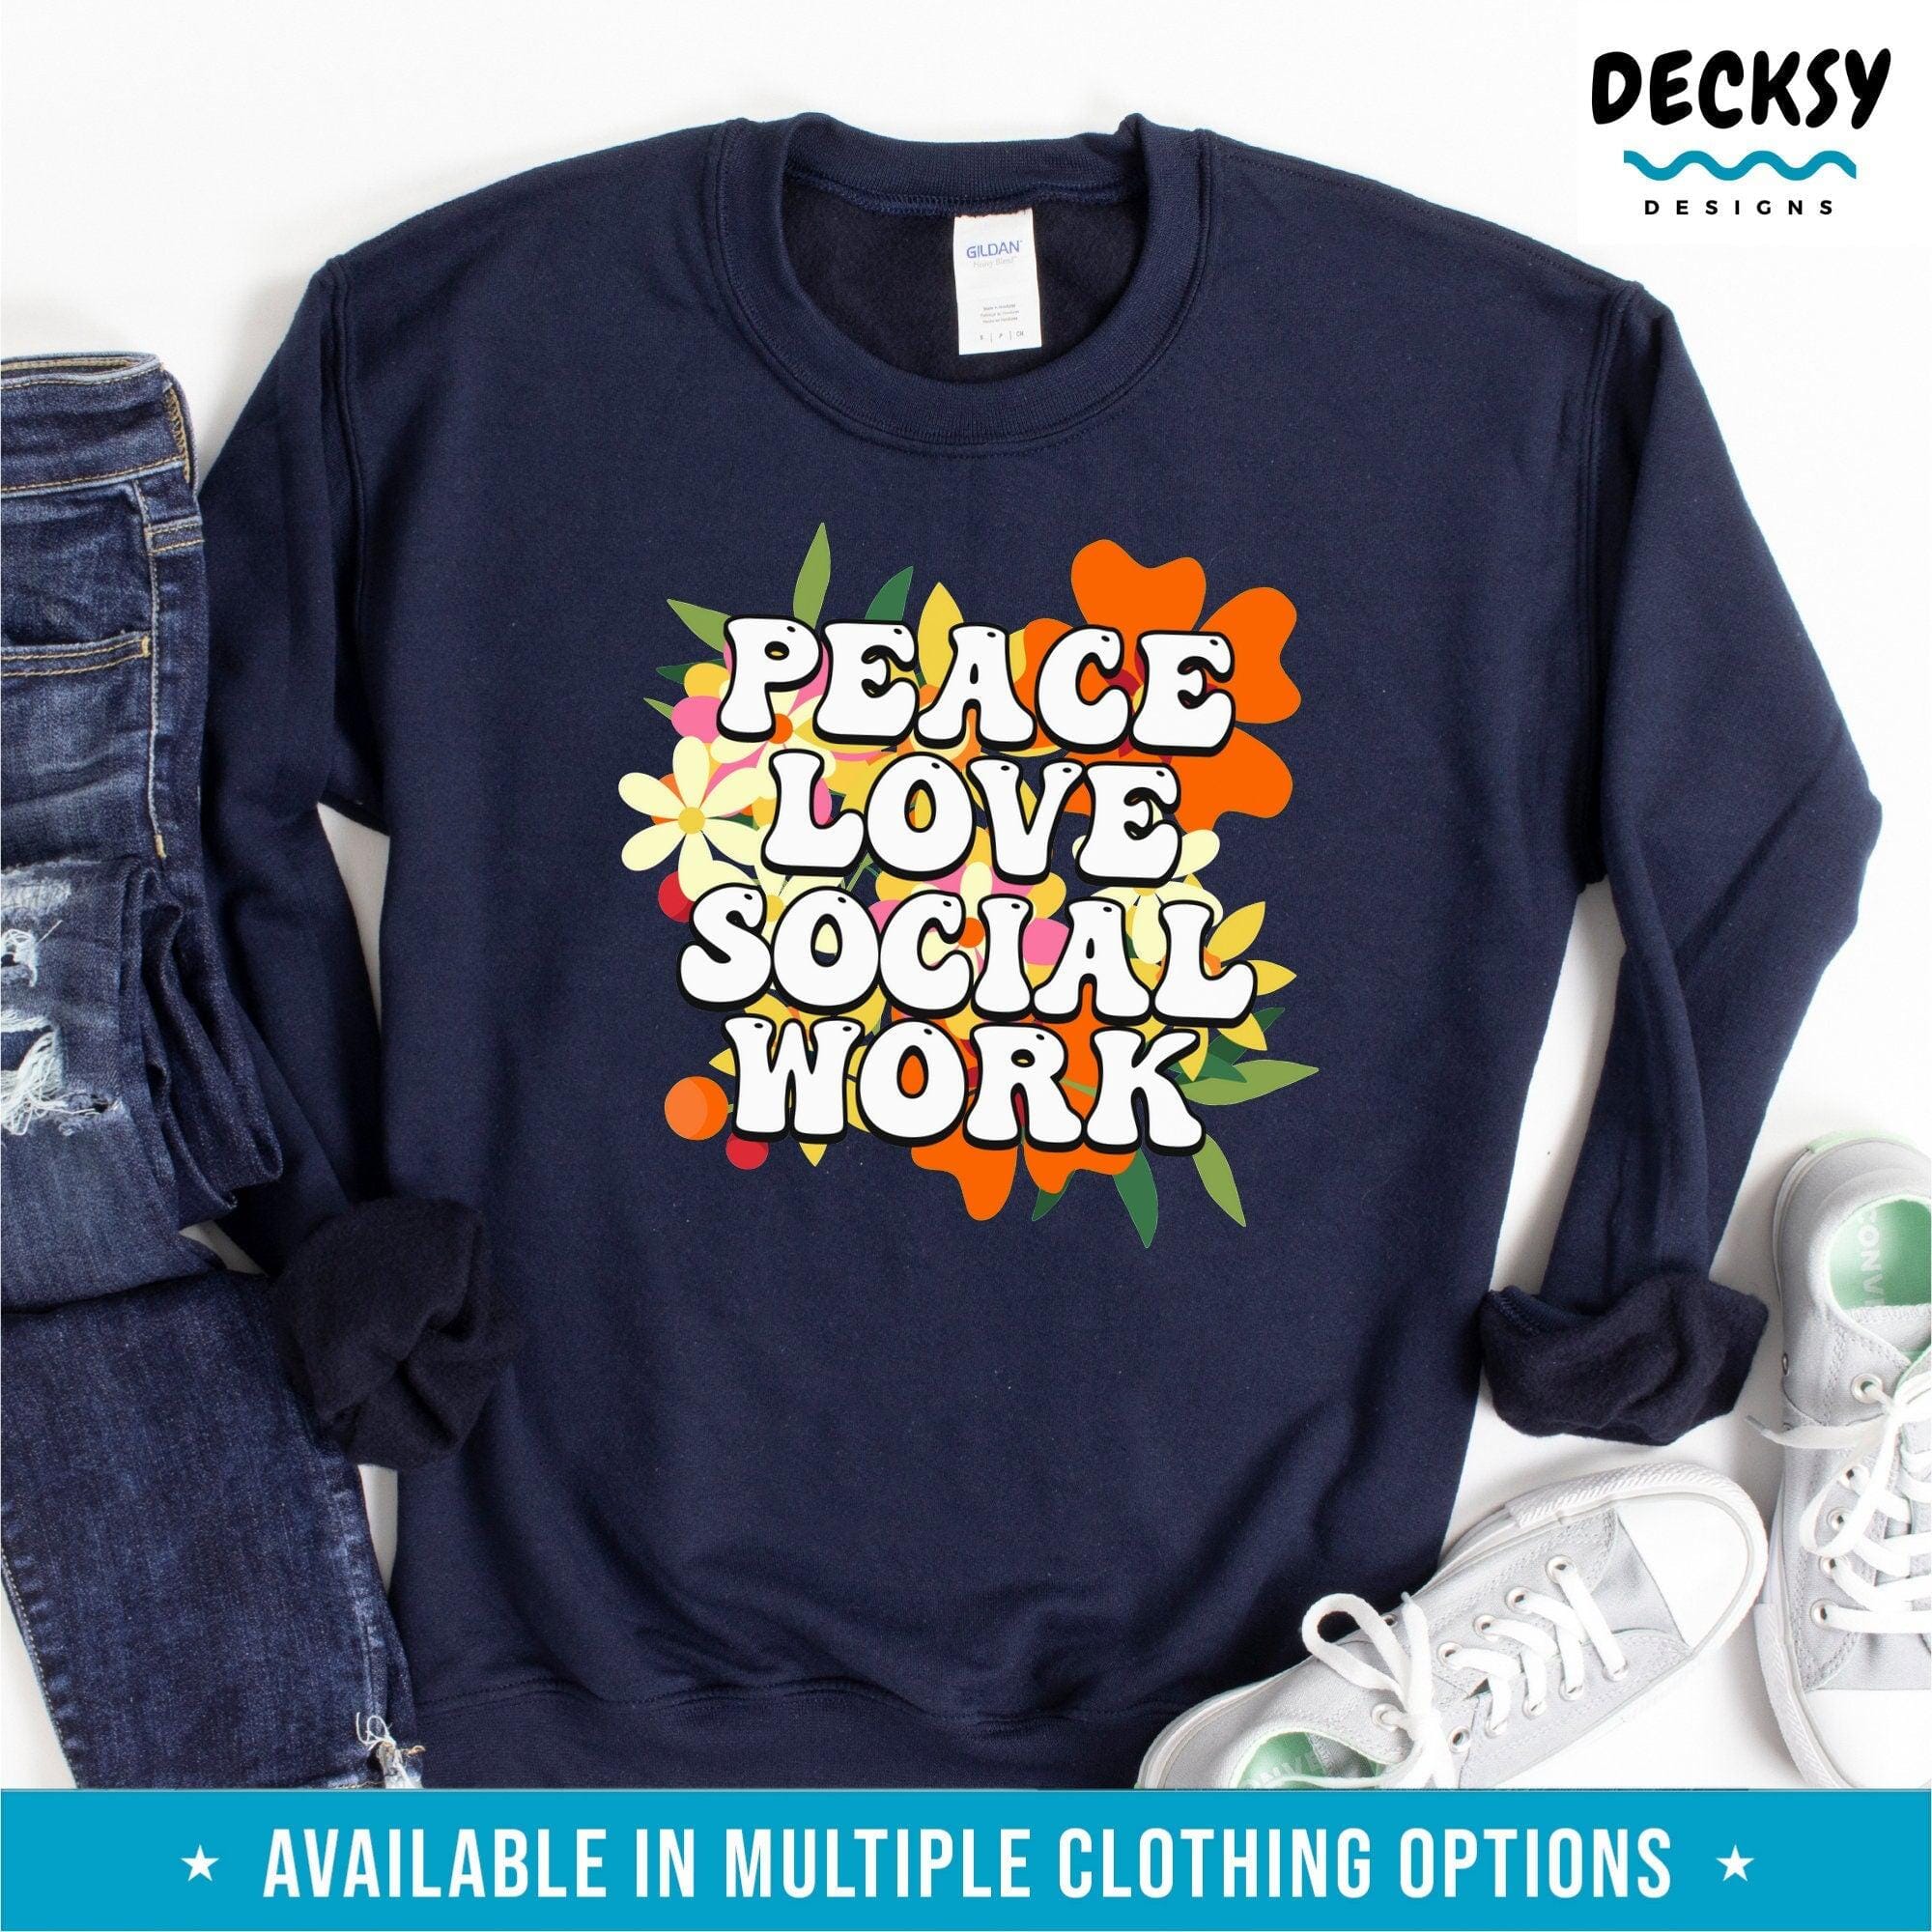 Social Worker Tshirt, Gift For Social Worker-Clothing:Gender-Neutral Adult Clothing:Tops & Tees:T-shirts:Graphic Tees-DecksyDesigns